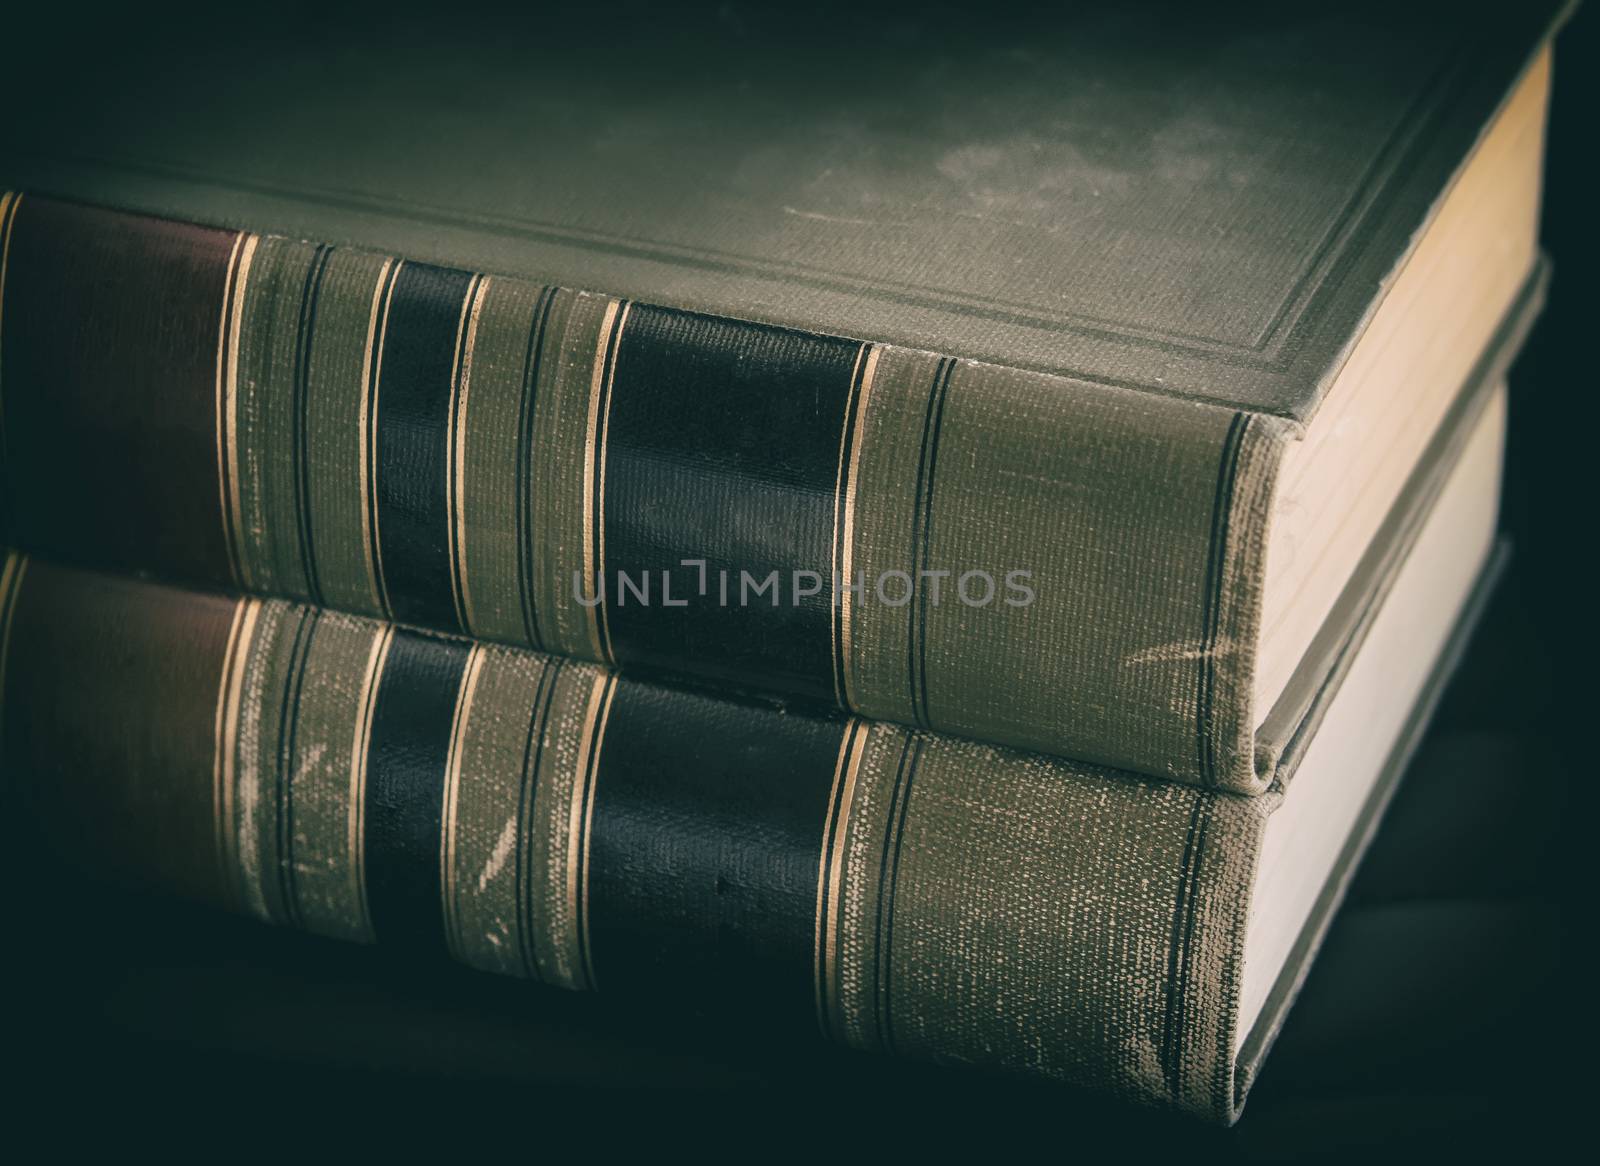 Legal law books by Paulmatthewphoto